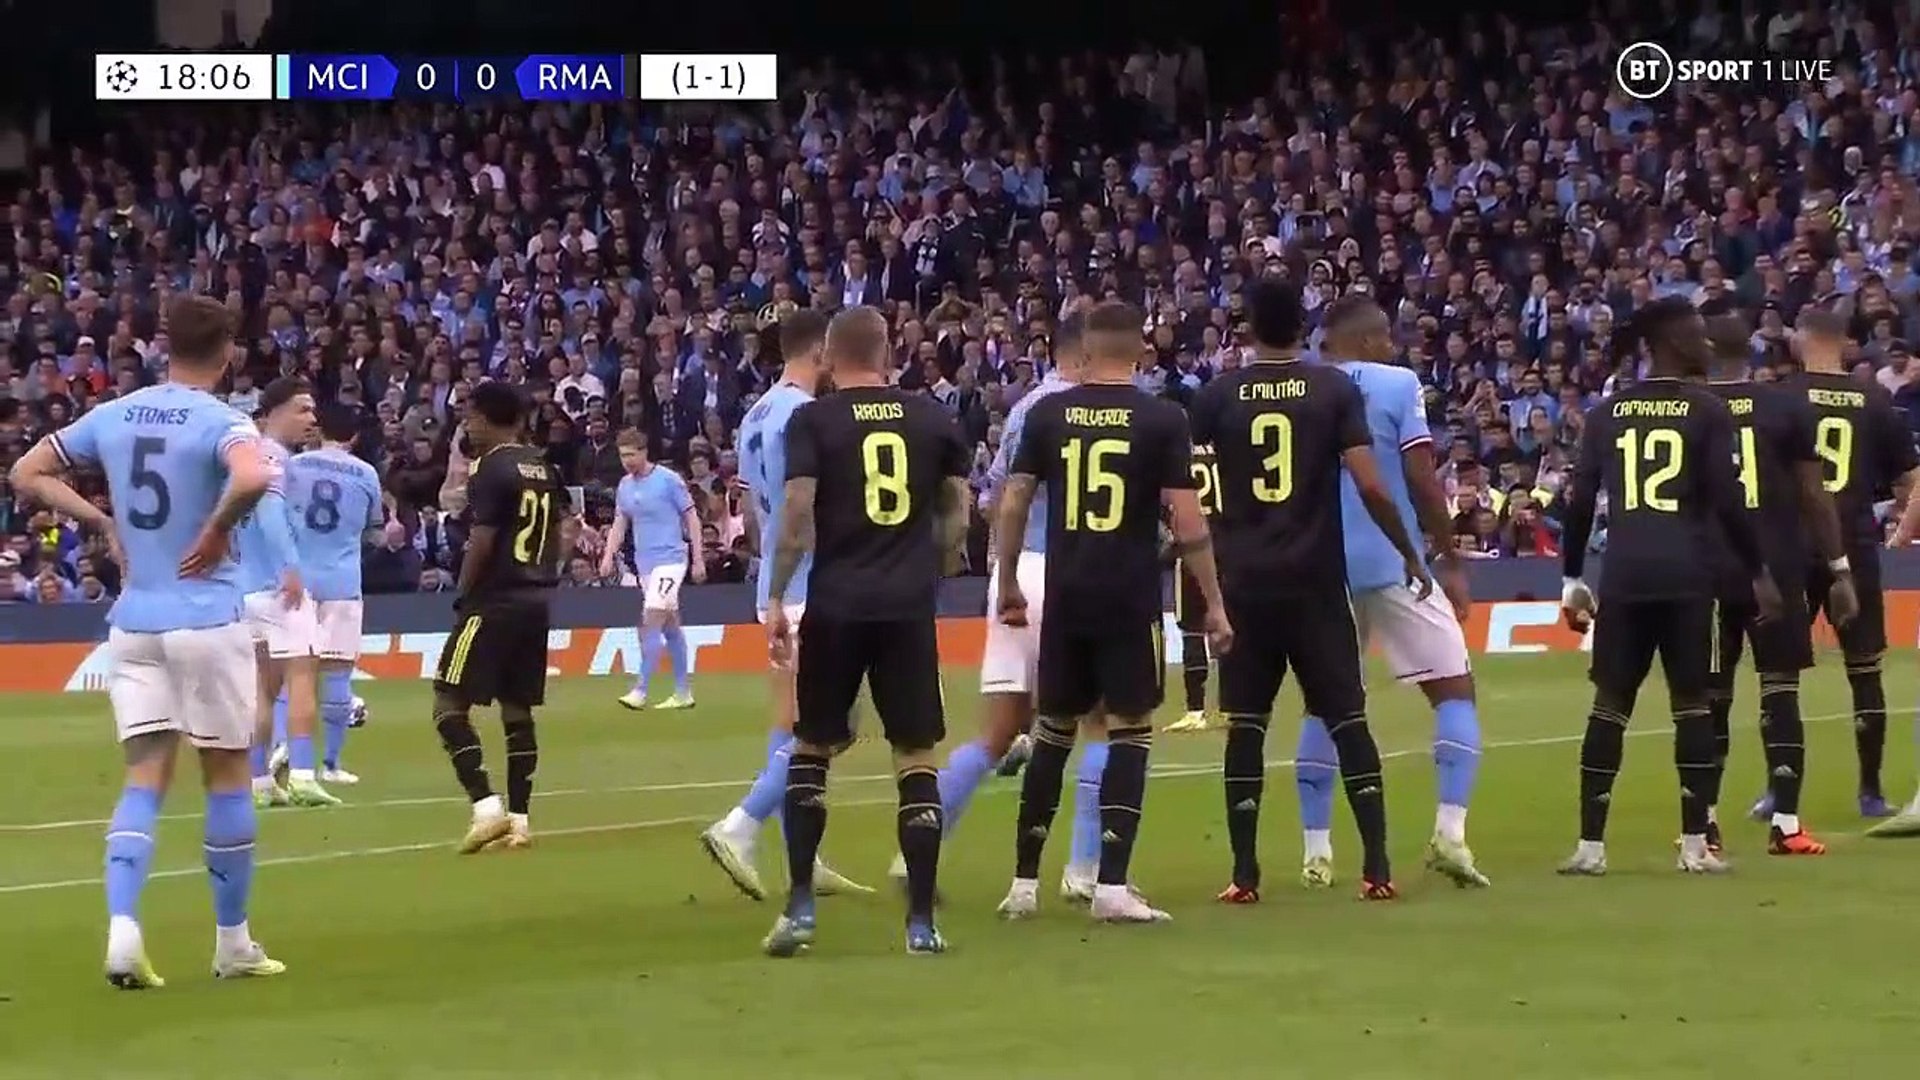 Manchester City vs Real Madrid Extended Highlights - video Dailymotion